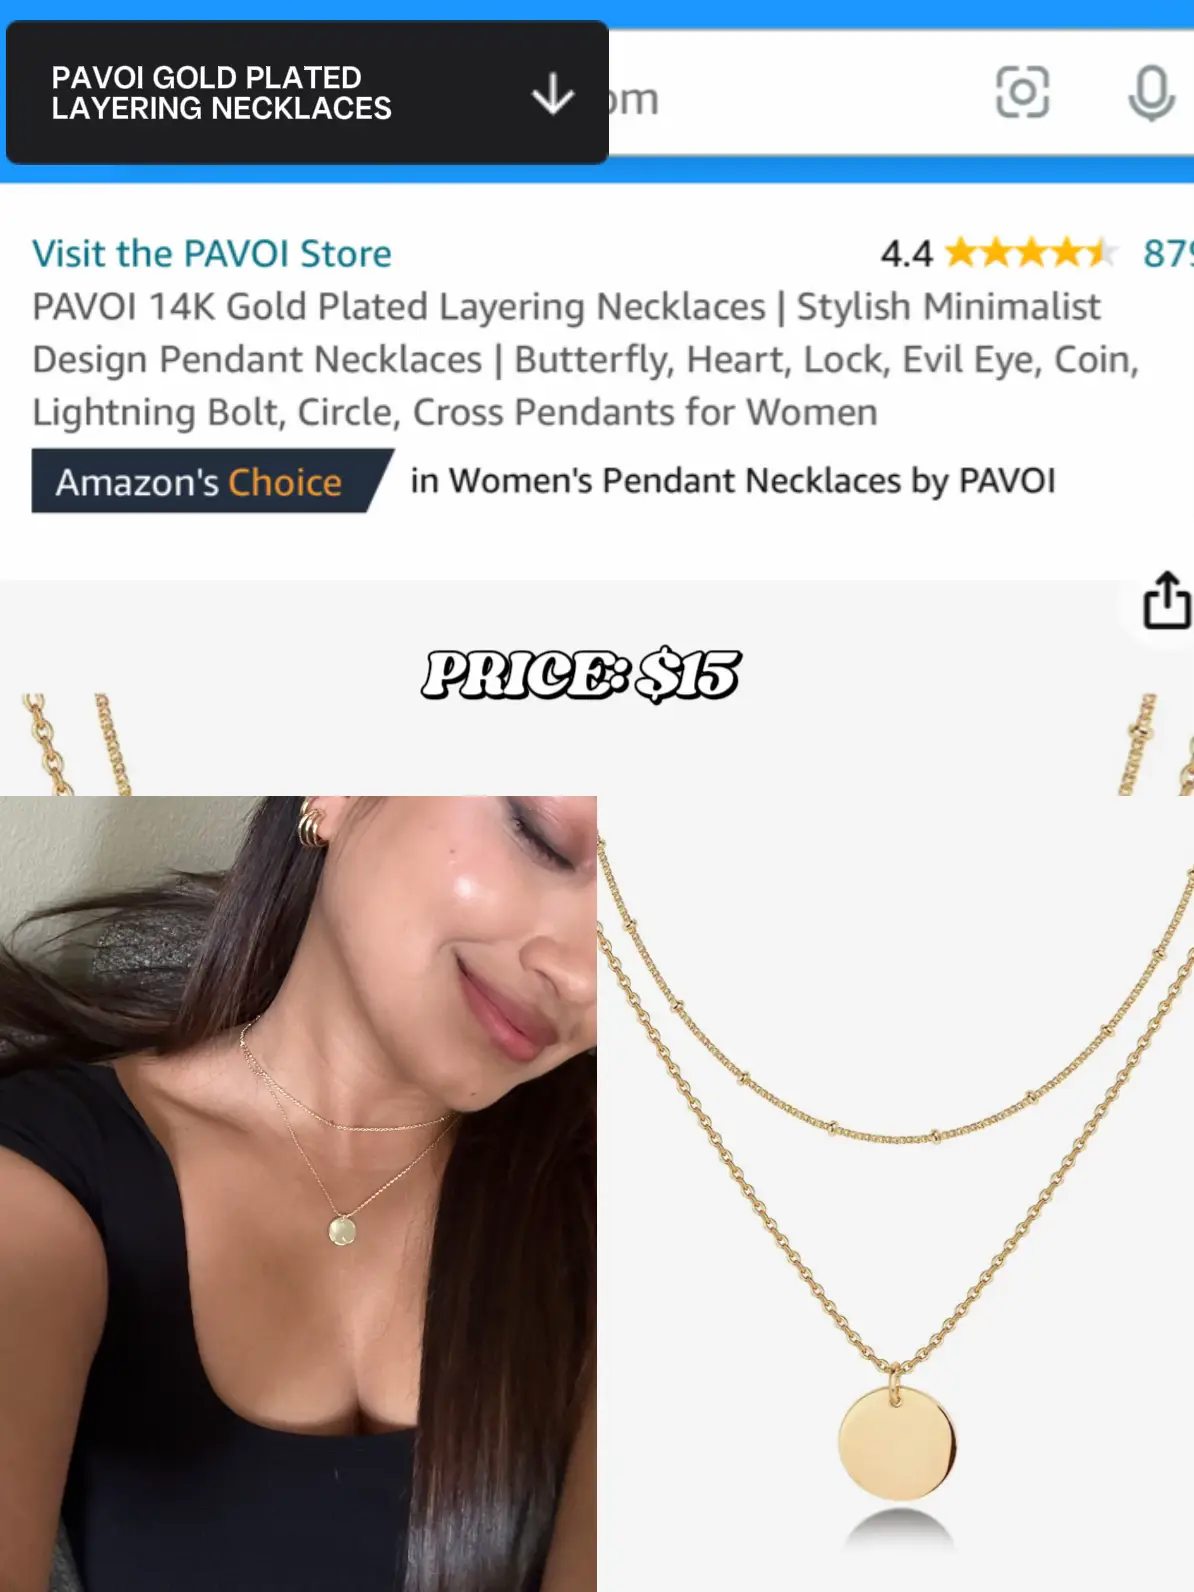 Lock Gold Pendant Necklace for Women by PAVOI